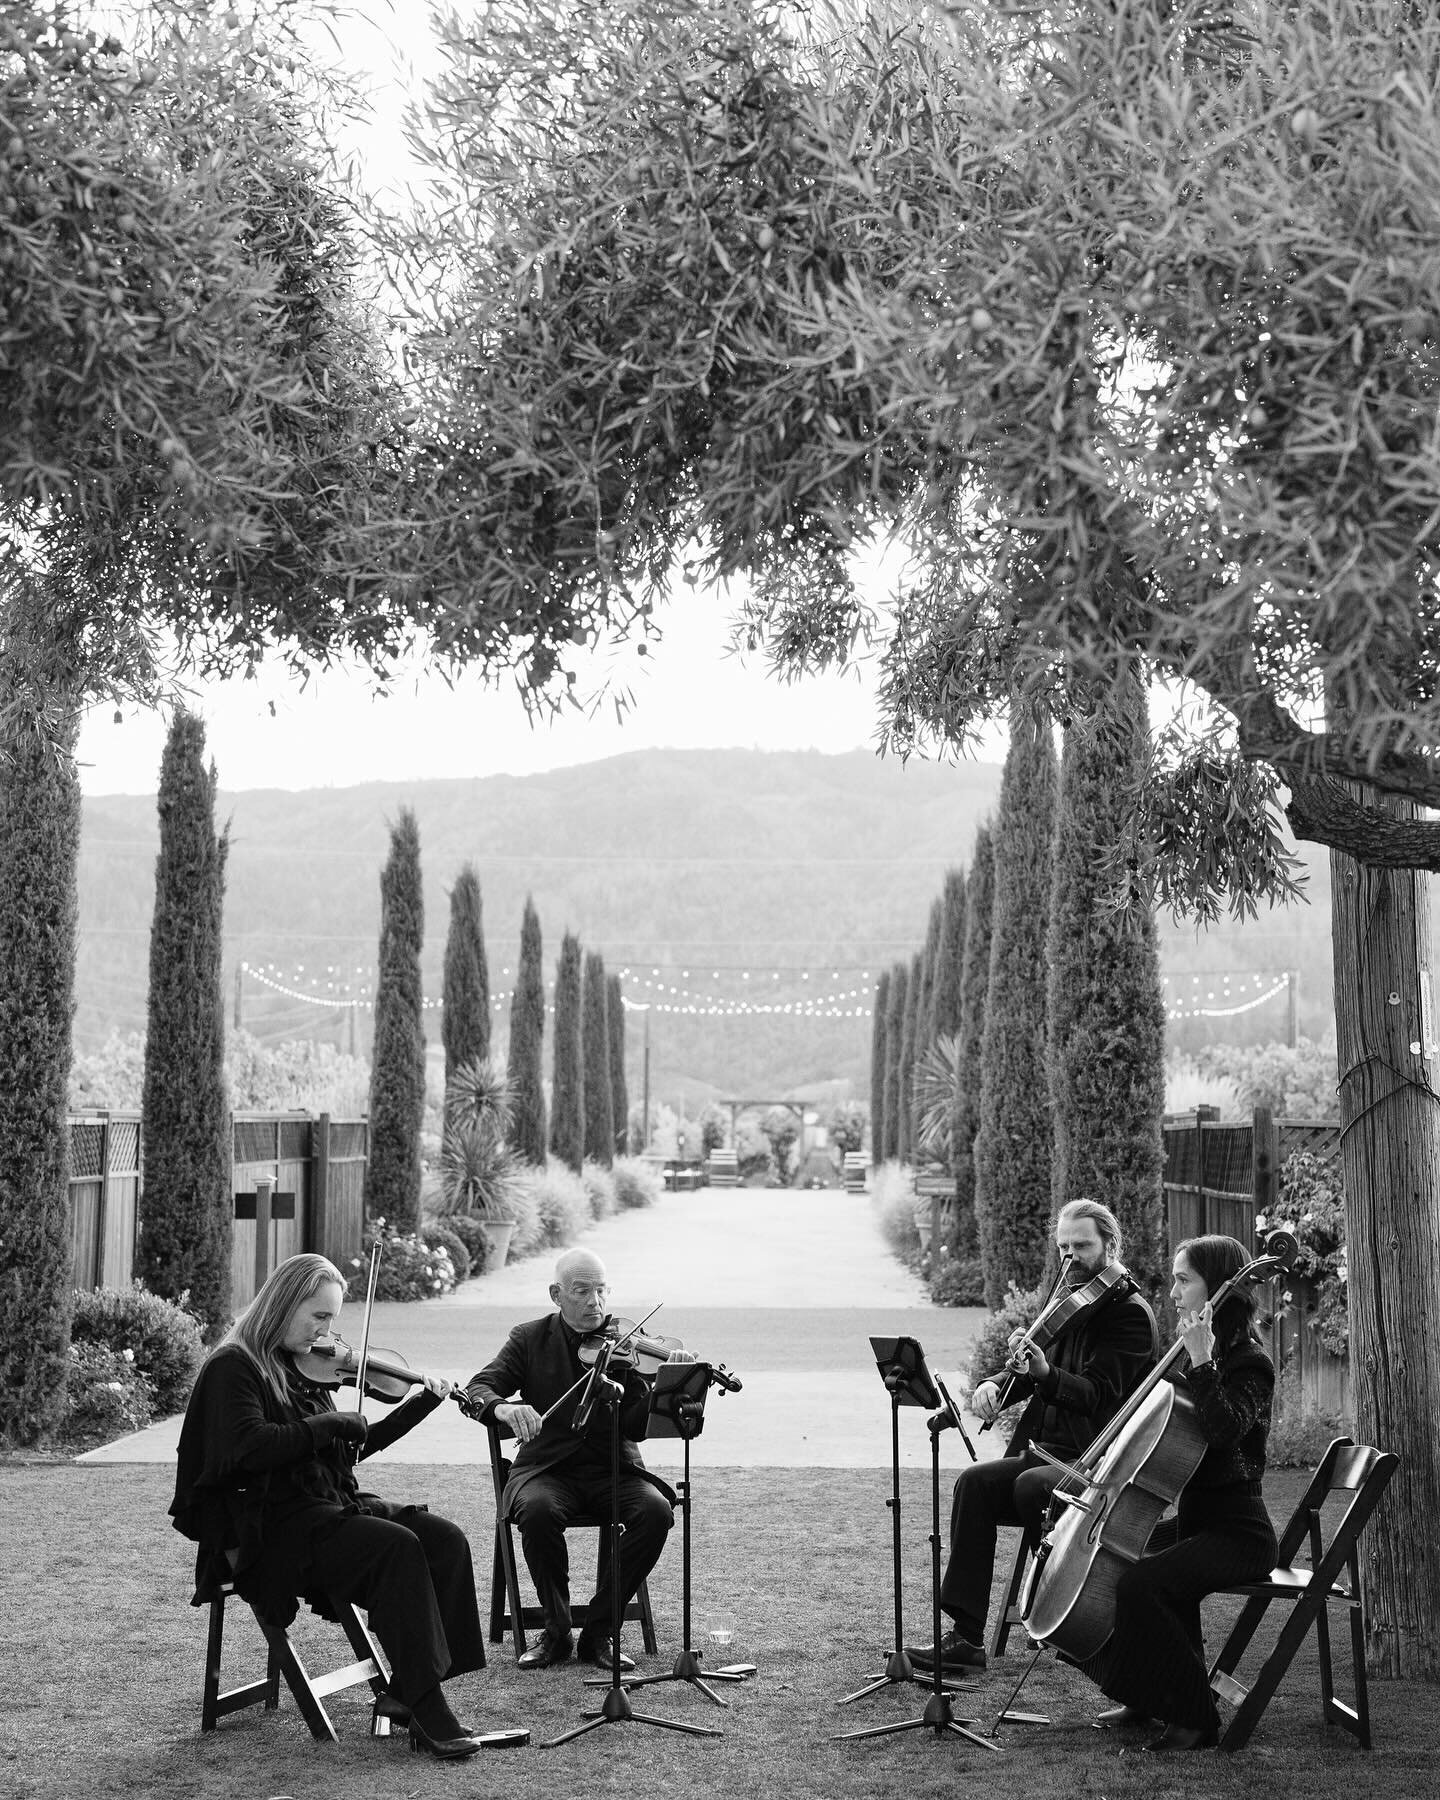 Reflecting on the snapshots of joy and the beautiful tapestry of memories woven in 2022. 💗 Photo credit @caitlinoreillyphotography 
.
.
.
#violin #viola #cello #bellarosasq #napavalley #napavalleywedding #music #ceremonymusic #newyearsreflections